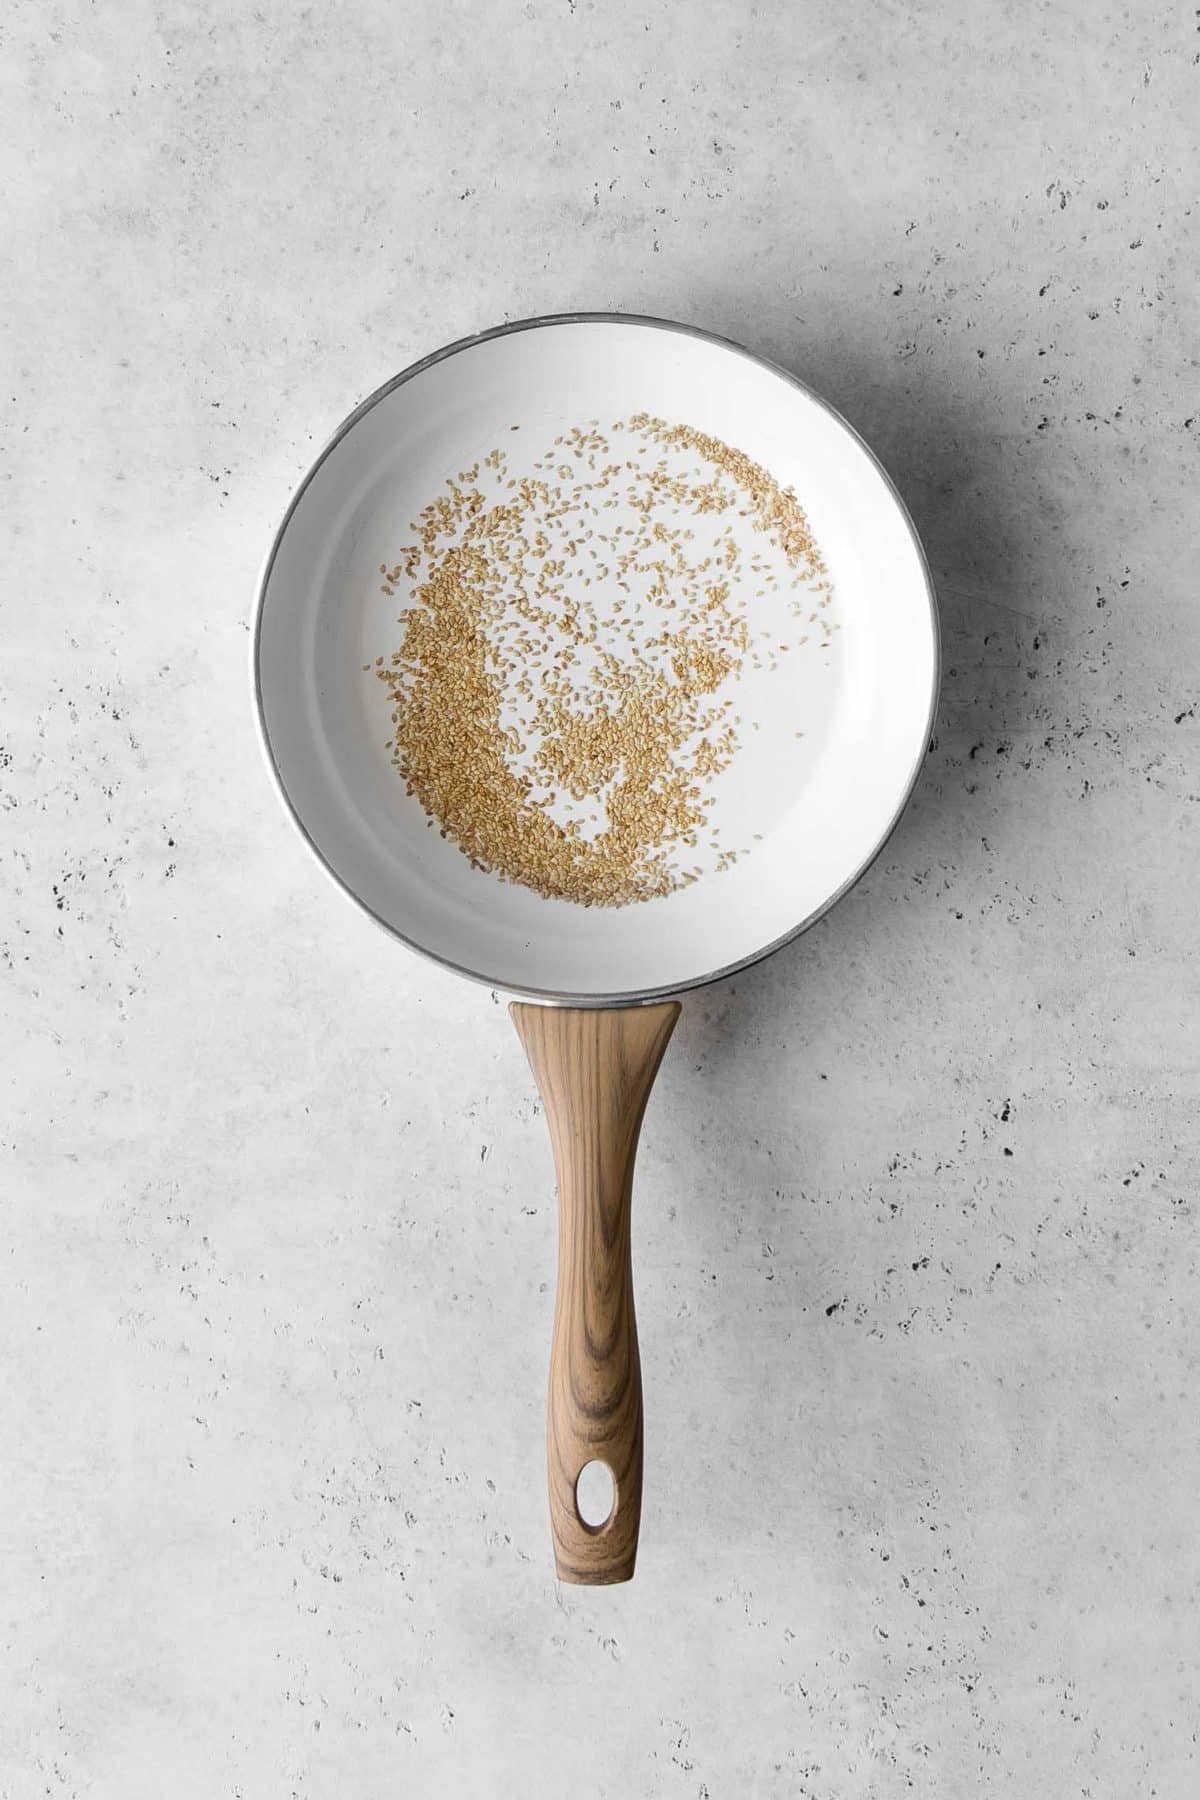 Sesame seeds being toasted in a white frying pan